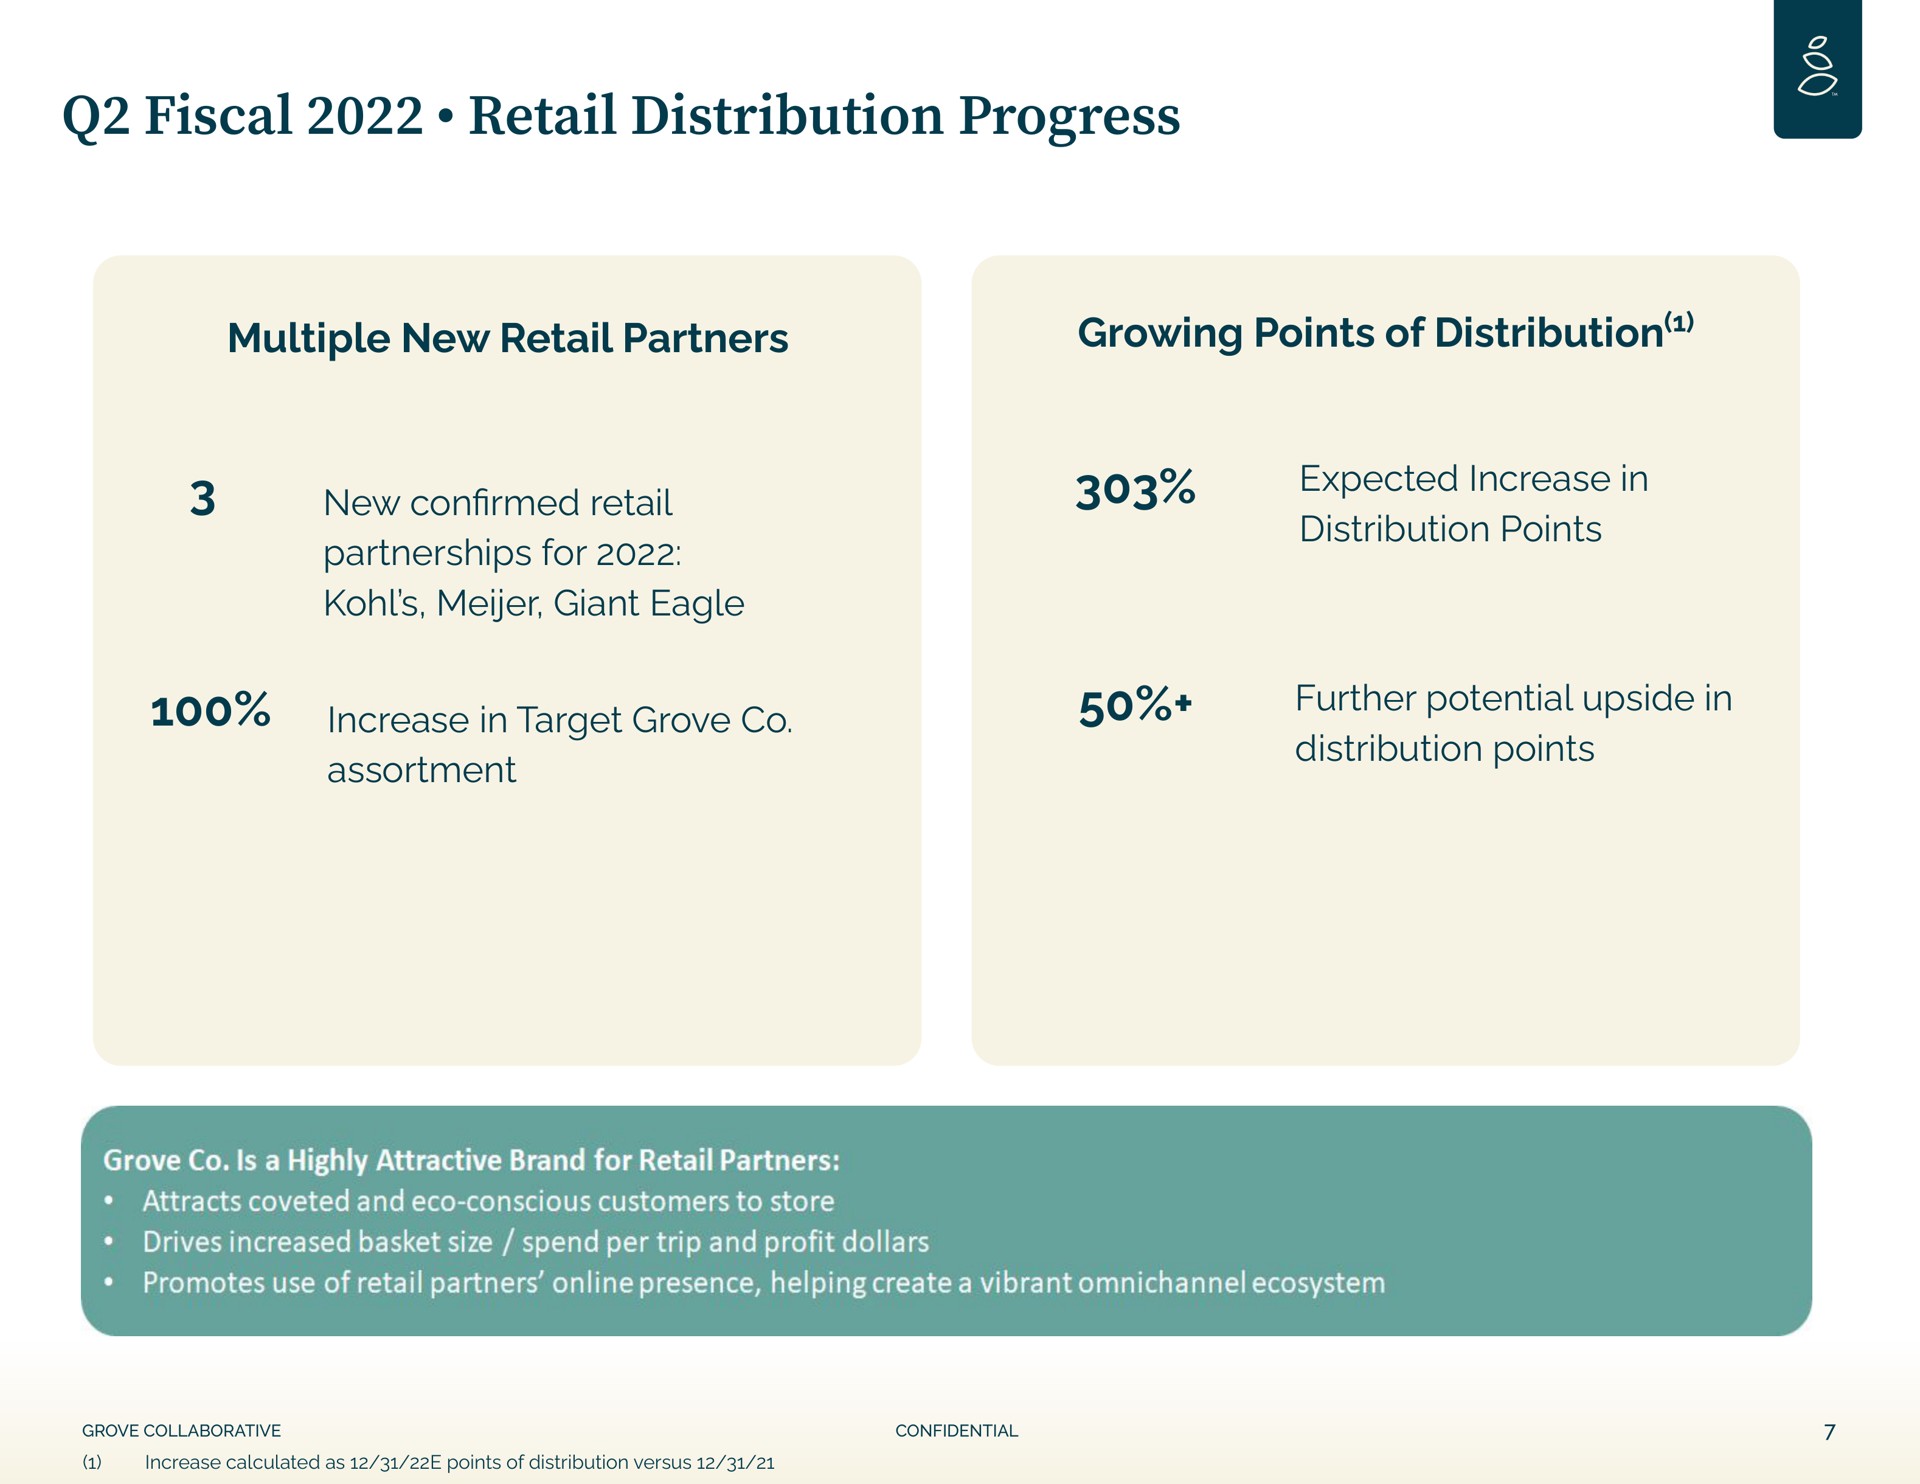 fiscal retail distribution progress multiple new retail partners growing points of distribution new con retail partnerships for kohl giant eagle expected increase in distribution points increase in target grove assortment further potential upside in distribution points | Grove